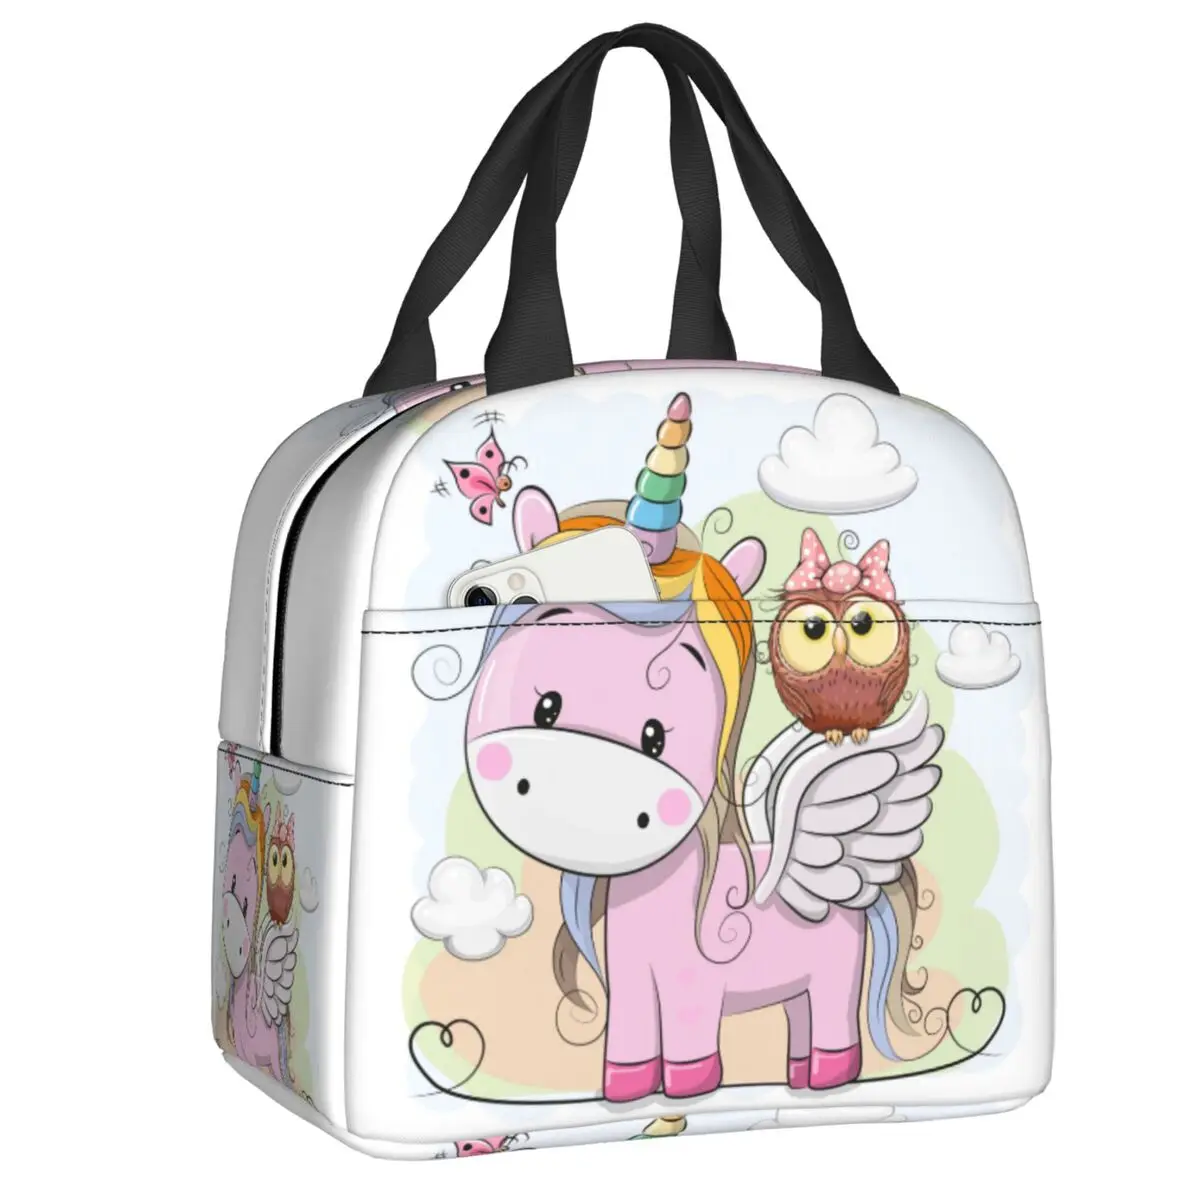 

Cute Unicorn And Owl Insulated Lunch Bags for Work School Cartoon Portable Cooler Thermal Bento Box Women Kids